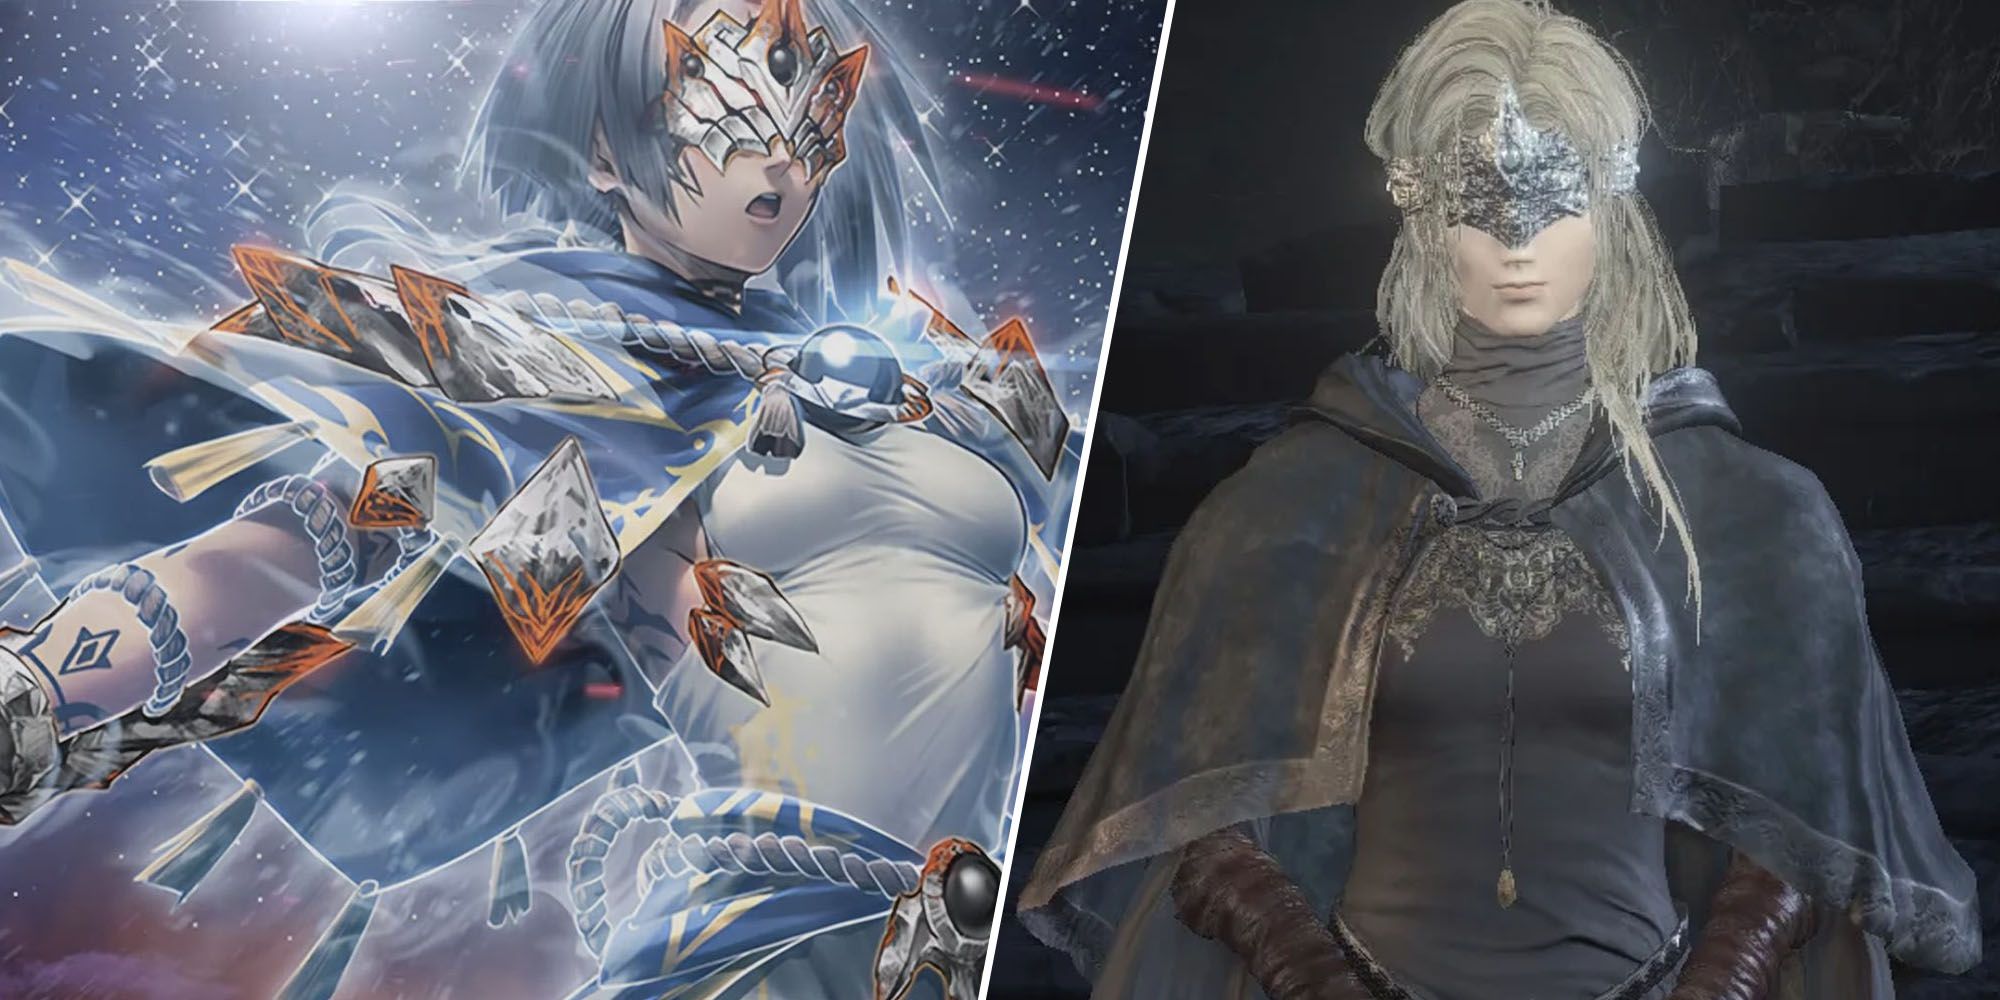 Yu-Gi-Oh Ashen card of a woman in white surrounded by blue magic with her eyes covered by a crown-like mask next to the Firekeeper from Dark Souls 3 in a similar eye mask with black robes and brown gloves, standing on stone steps